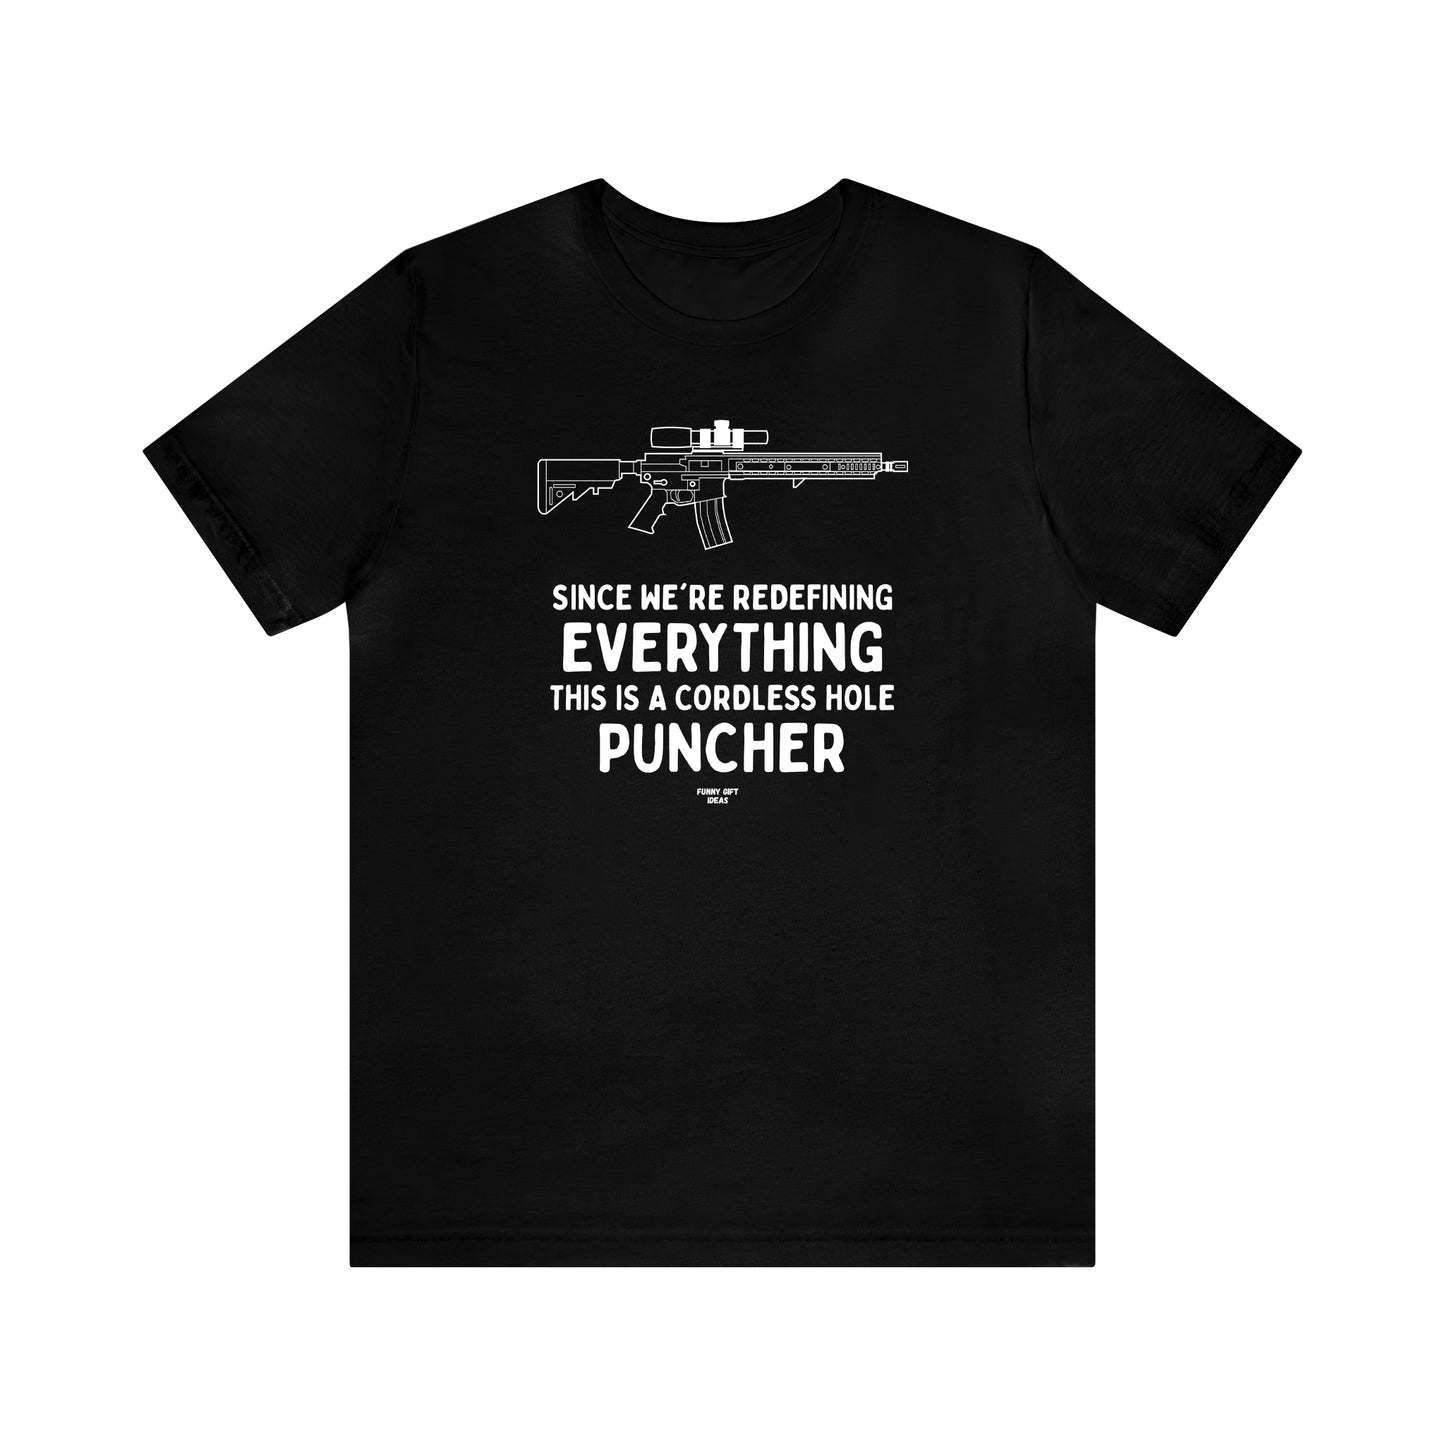 Mens T Shirts - Since We're Redefining Everything This is a Cordless Hole Puncher - Funny Men T Shirts